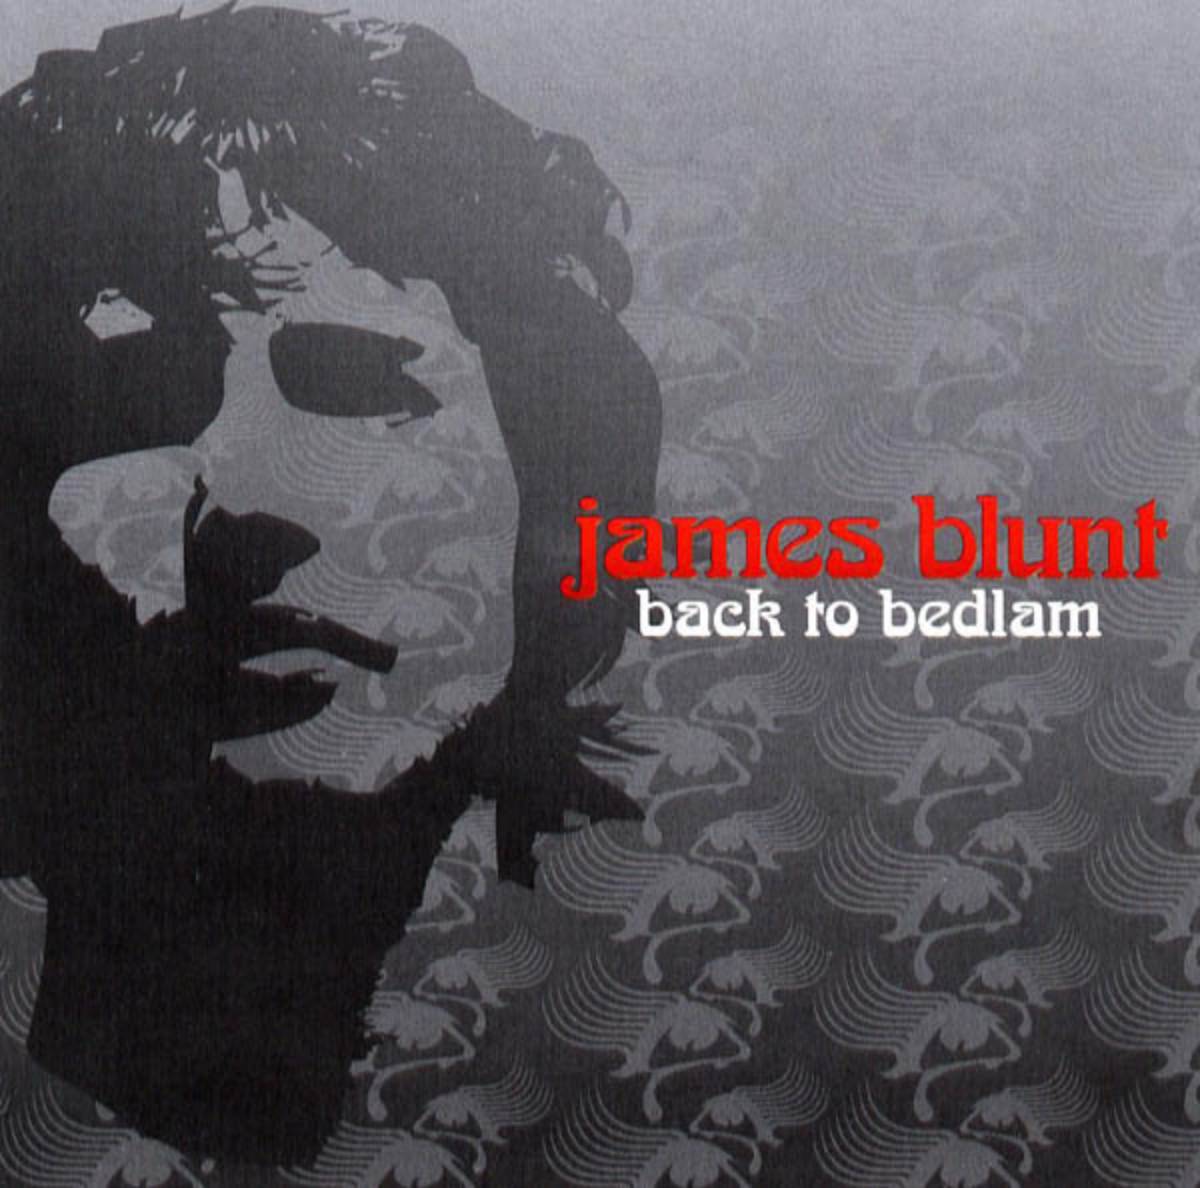 Back To Bedlam (2005) by James Blunt